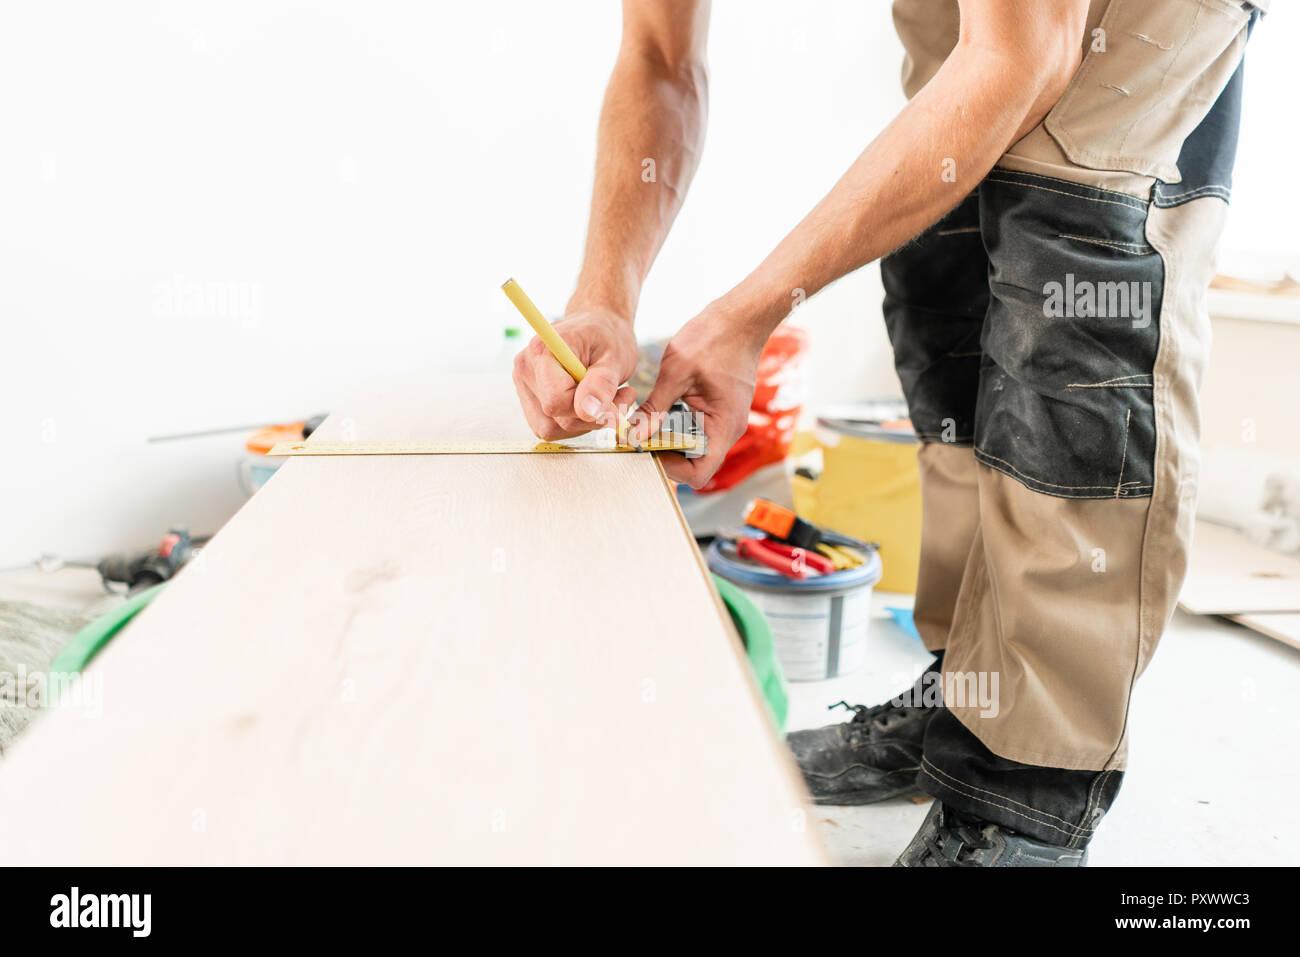 Male Worker Applies Markings To The Board For Cutting With A